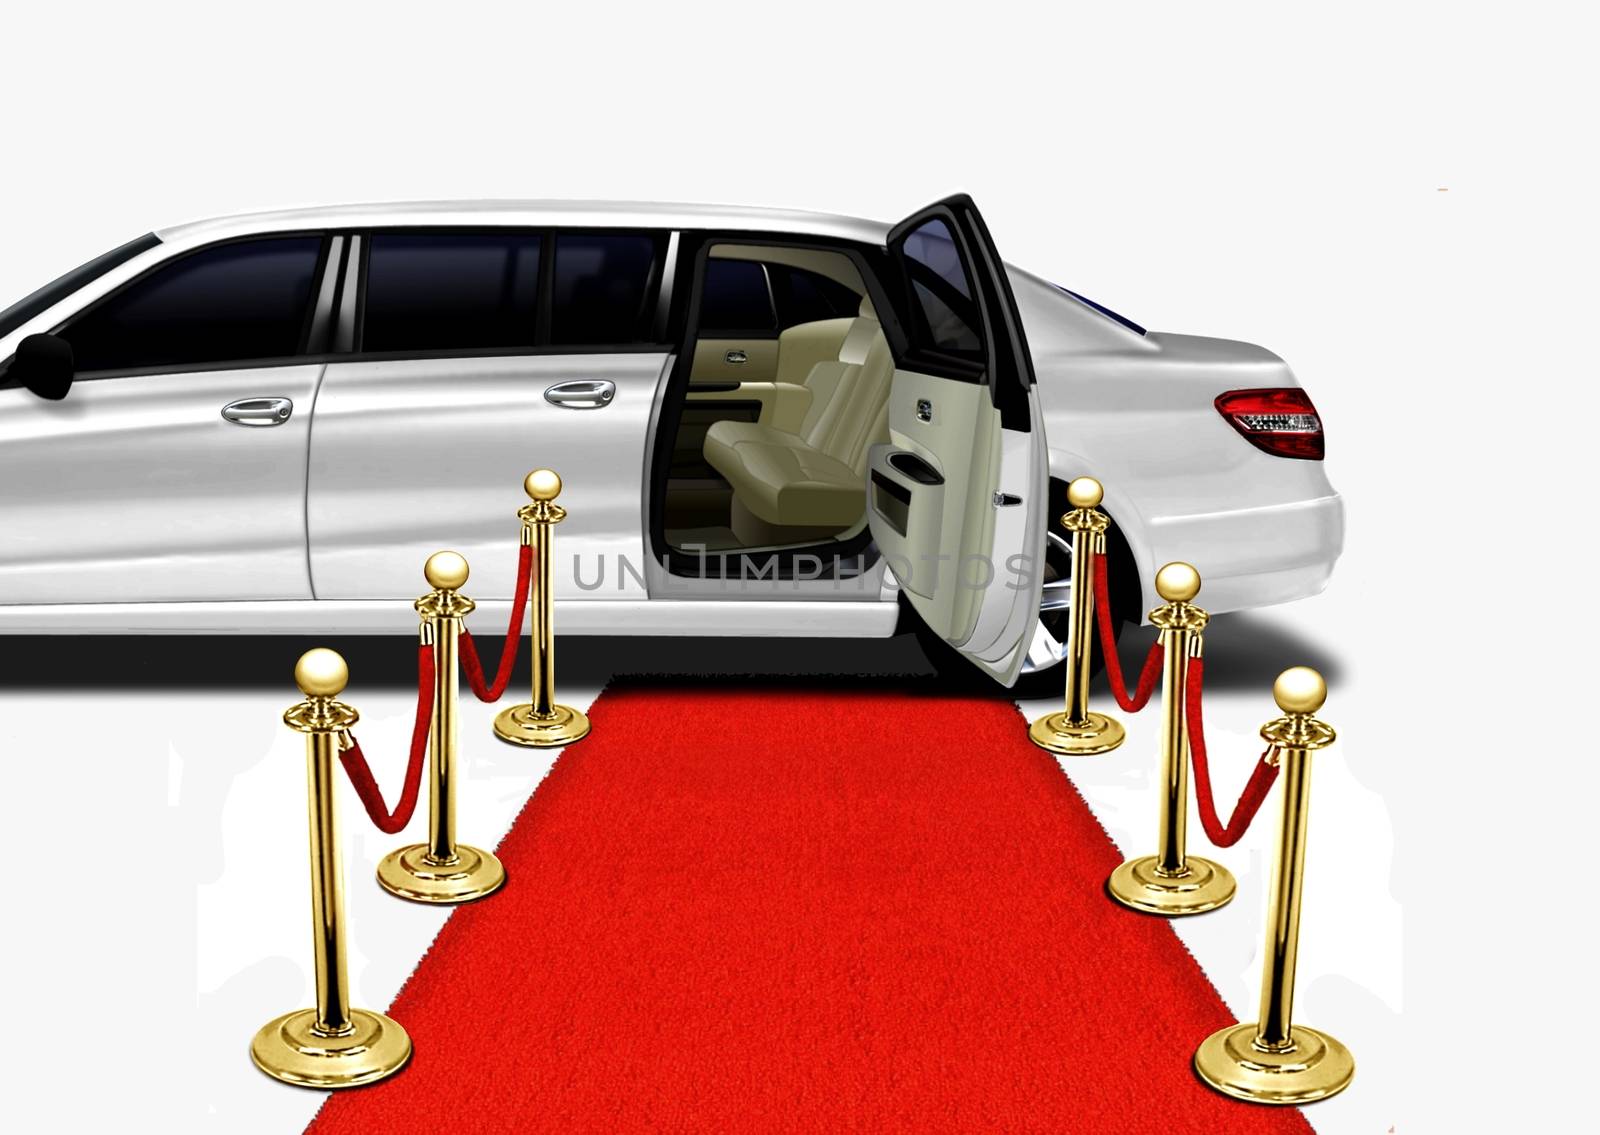 Limo Red Carpet Arrival by razihusin